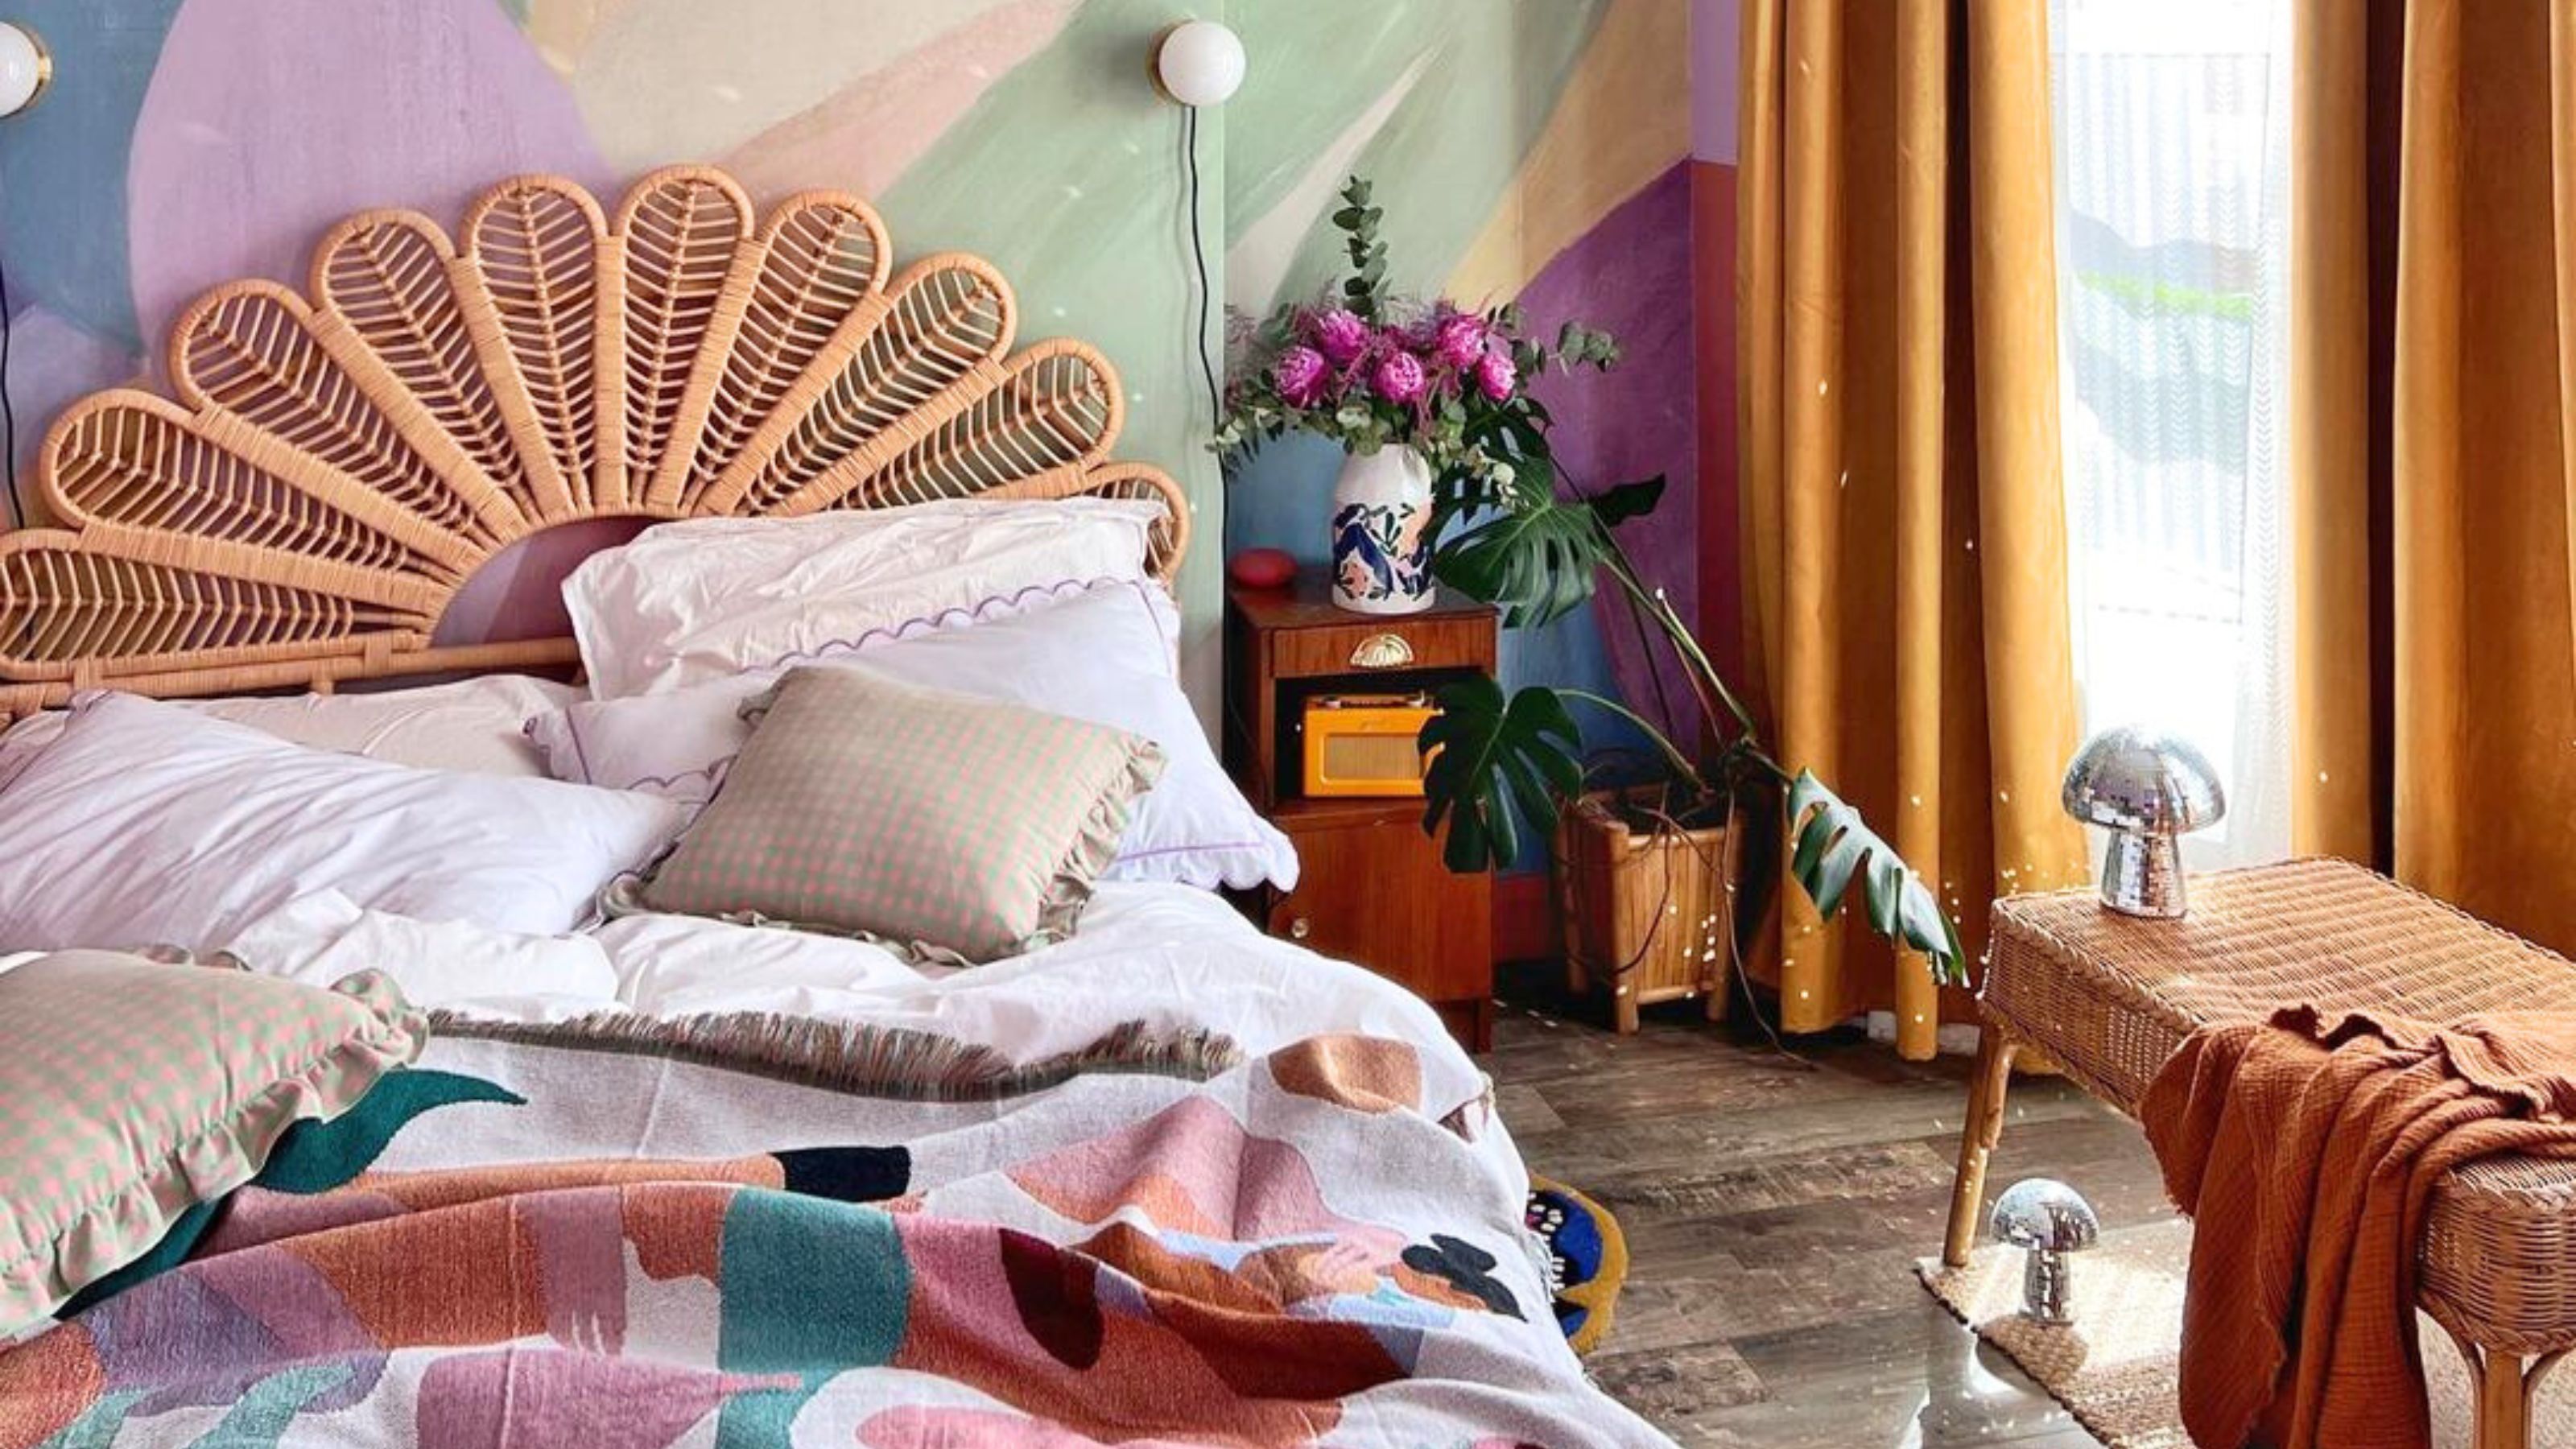 10+ cozy bedroom ideas that are cute and comfy